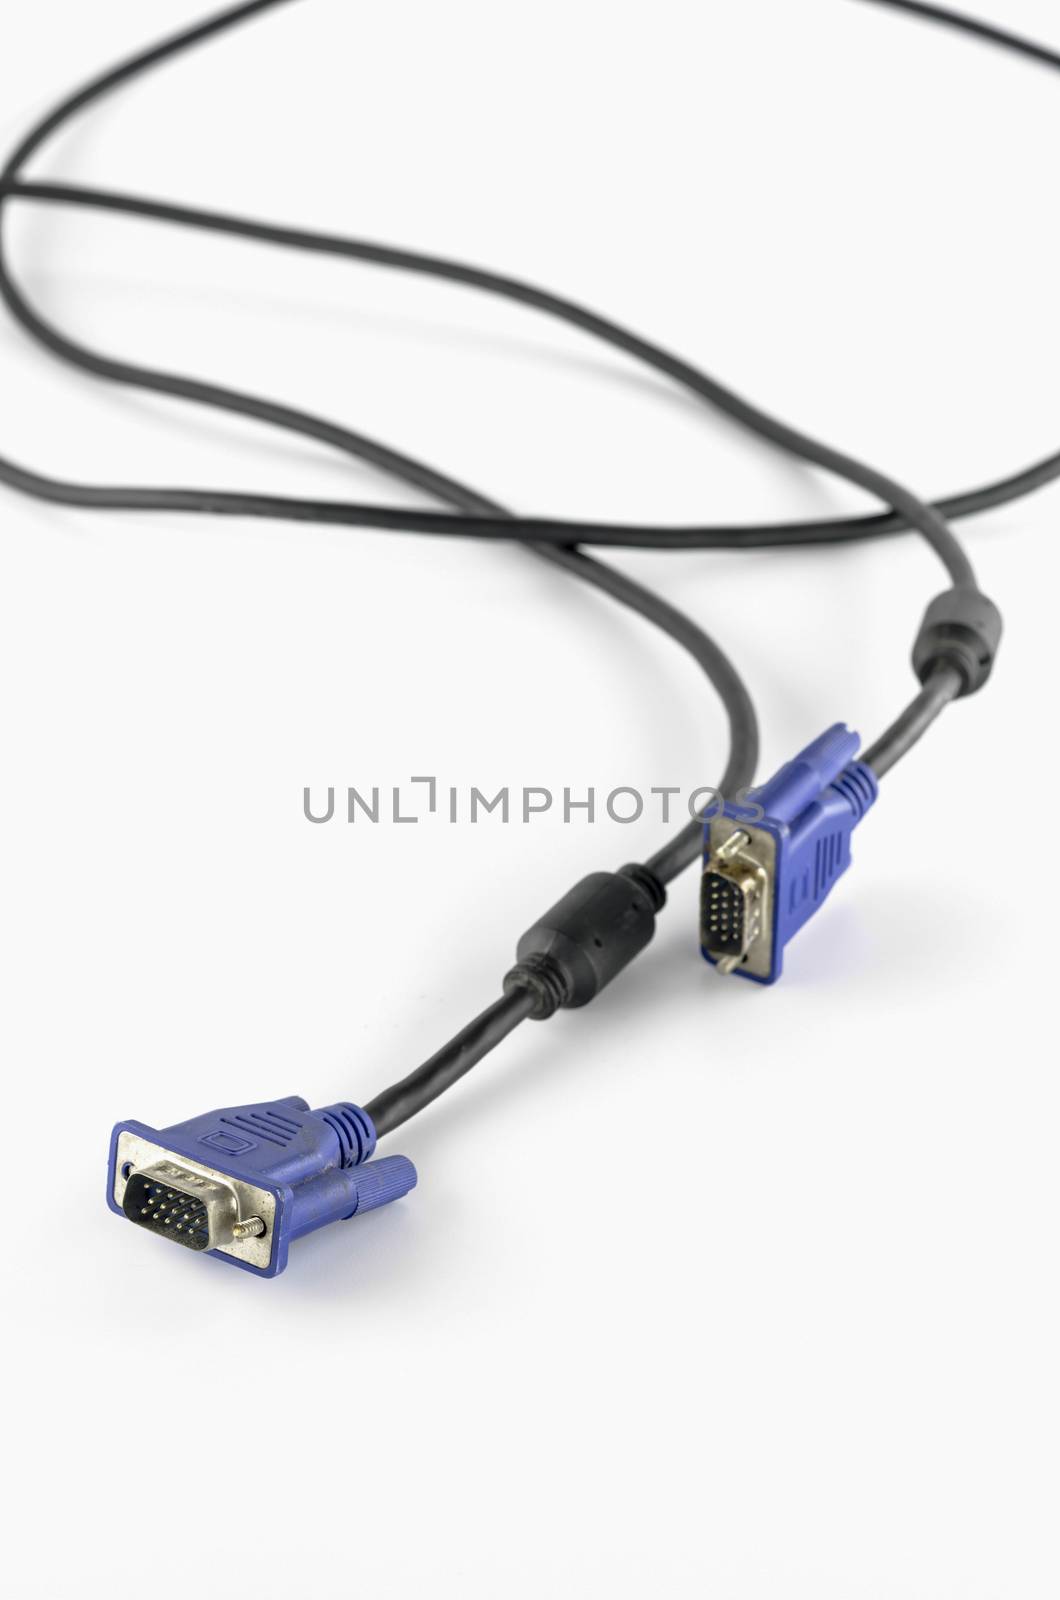 vga cable on a white background